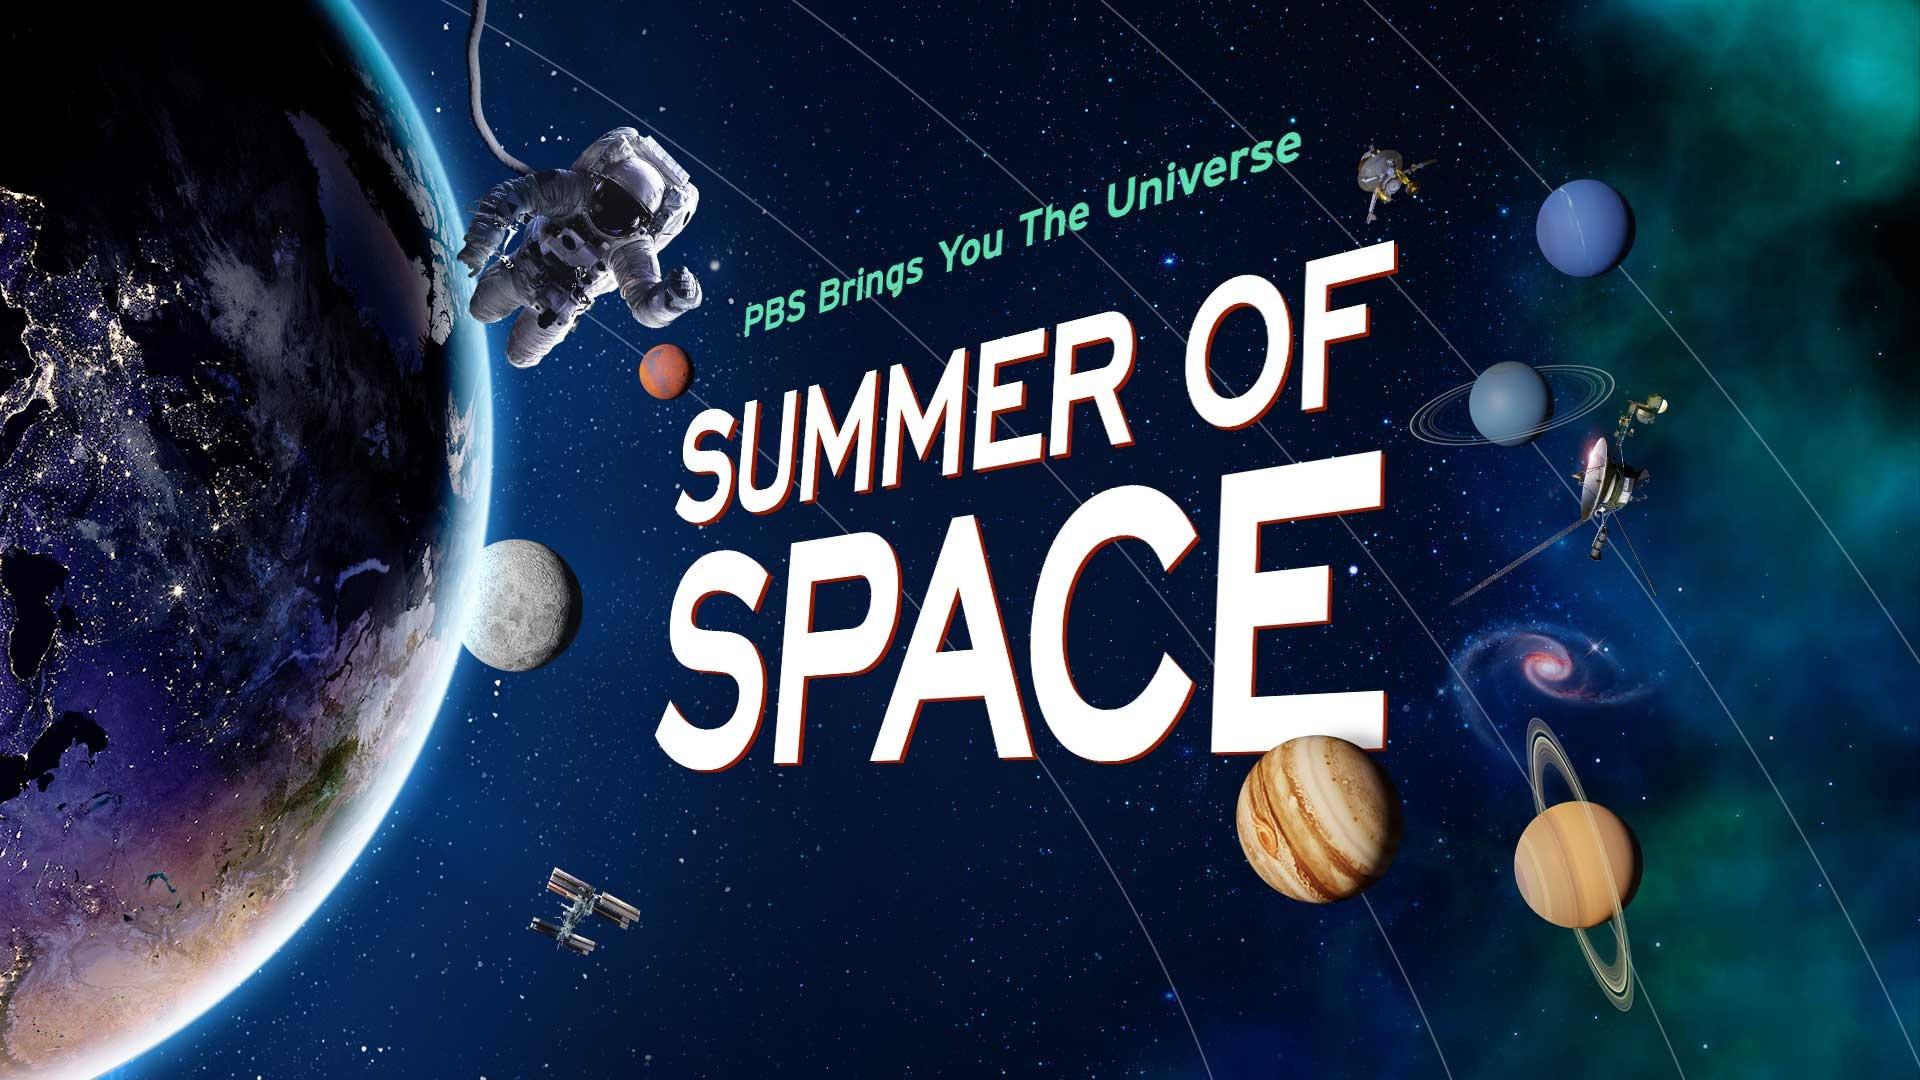 PBS Summer of Space